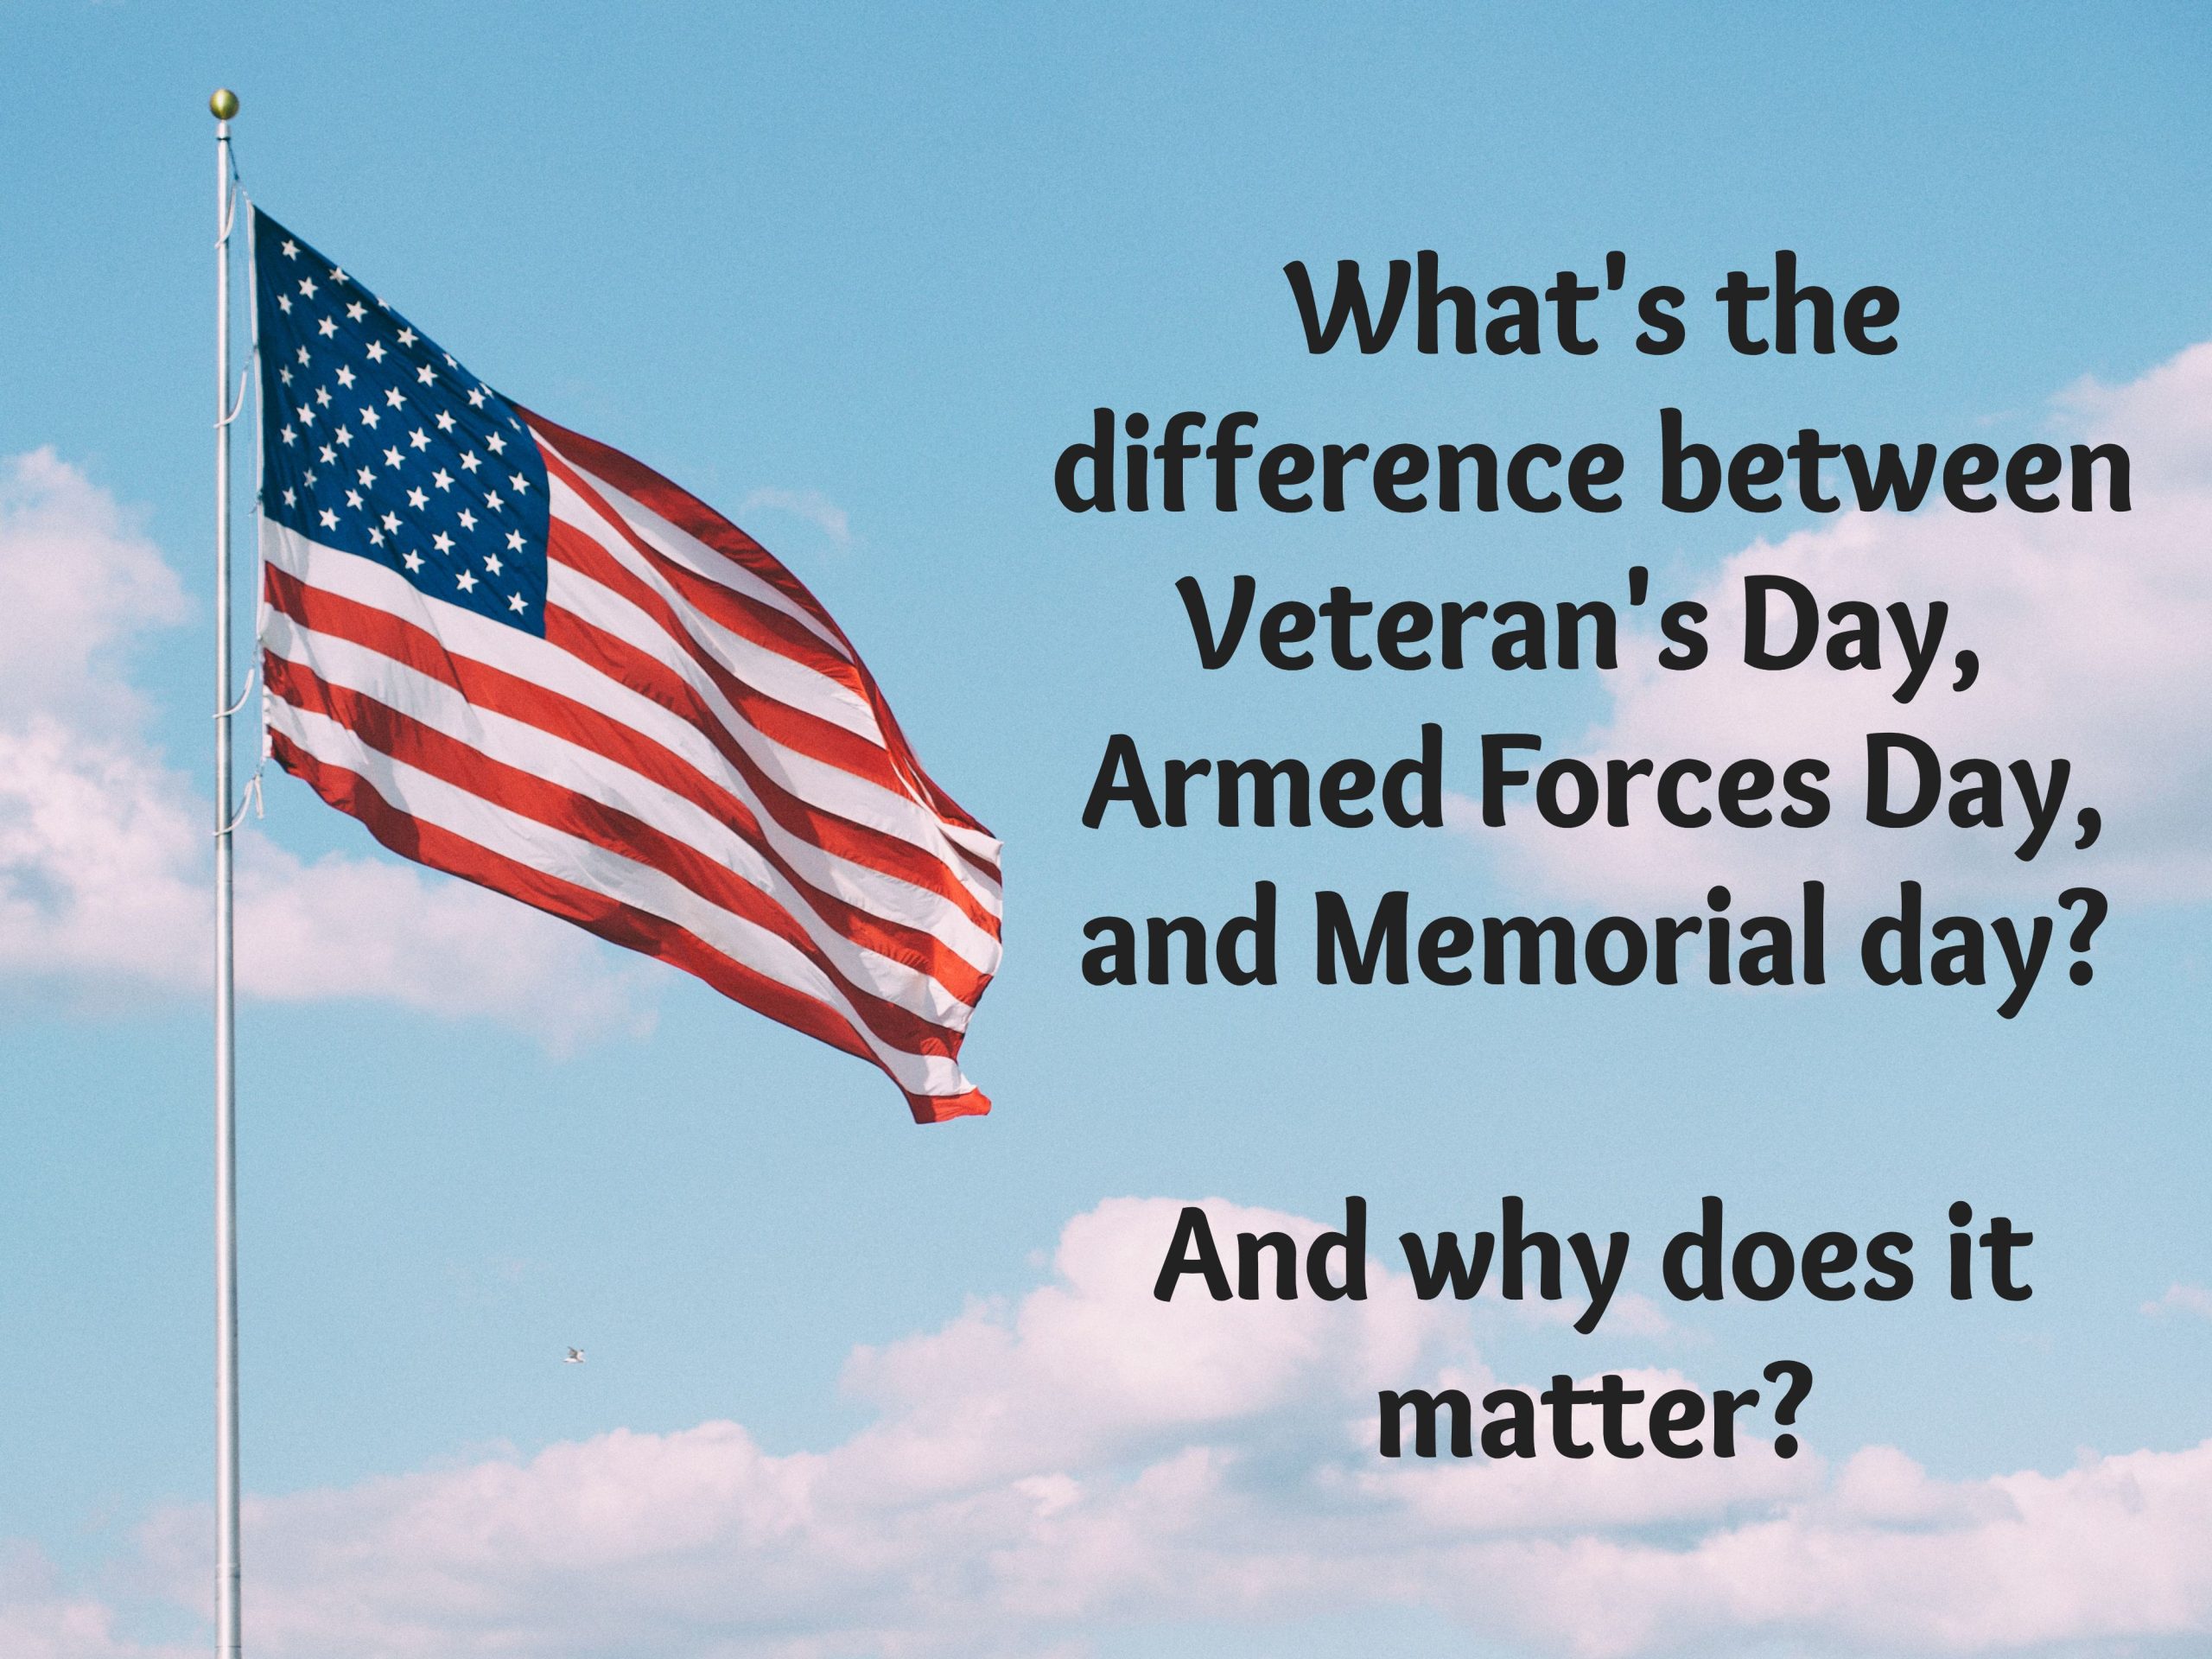 Veteran's Day, Armed Forces Day, Memorial Day